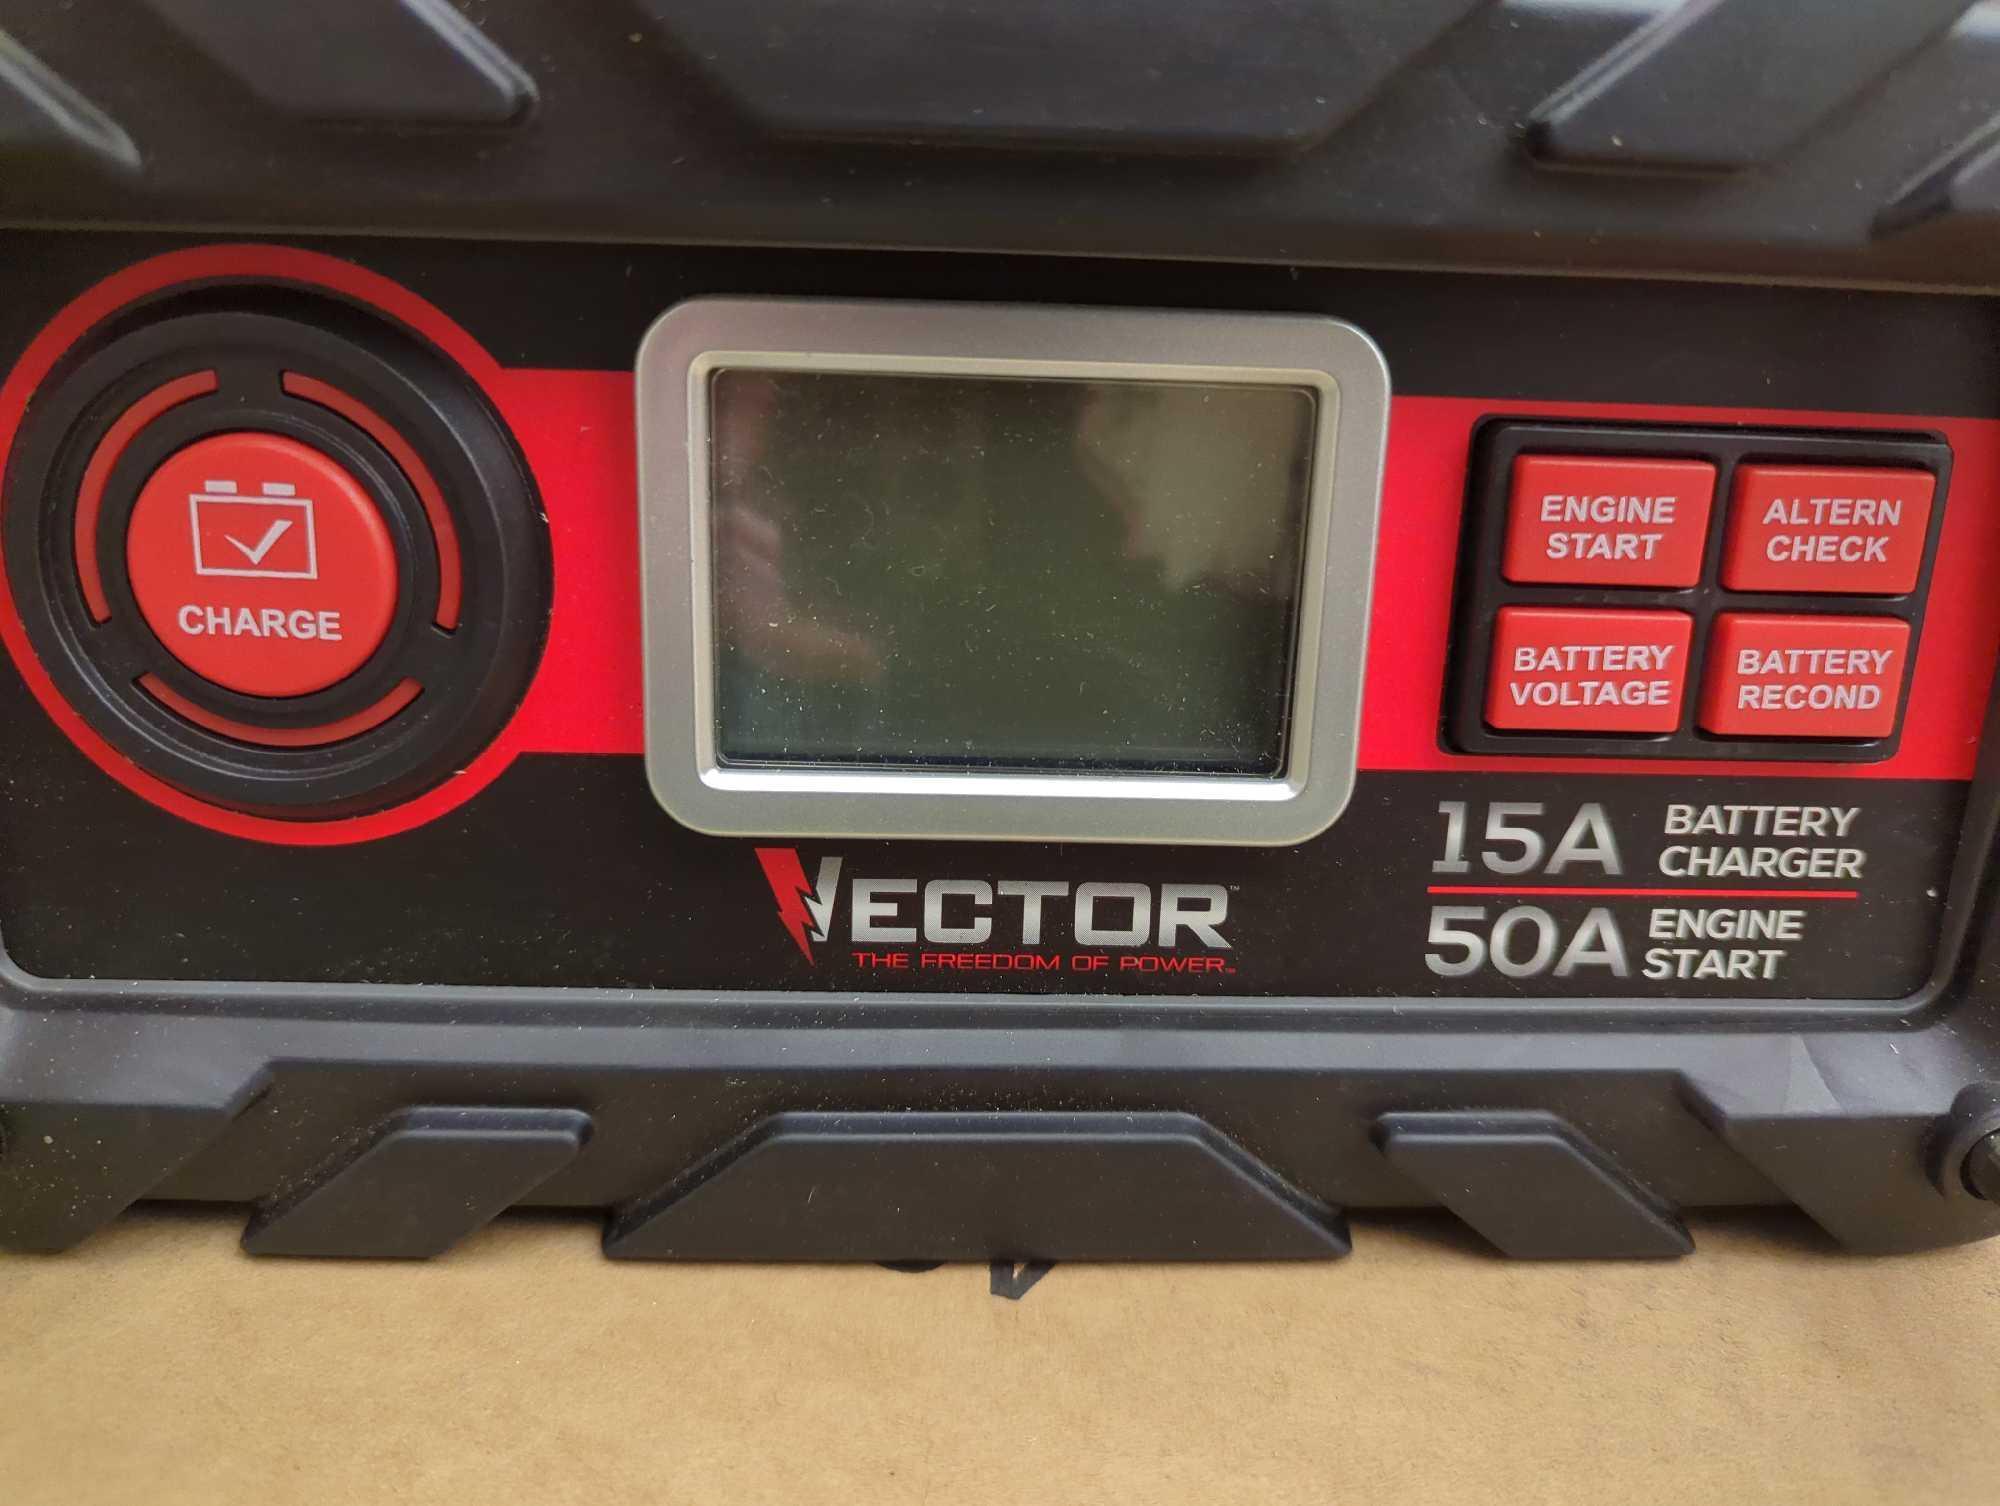 VECTOR 15 Amp Automatic 12V Battery Charger with 50 Amp Engine Start and Alternator Check, Appears